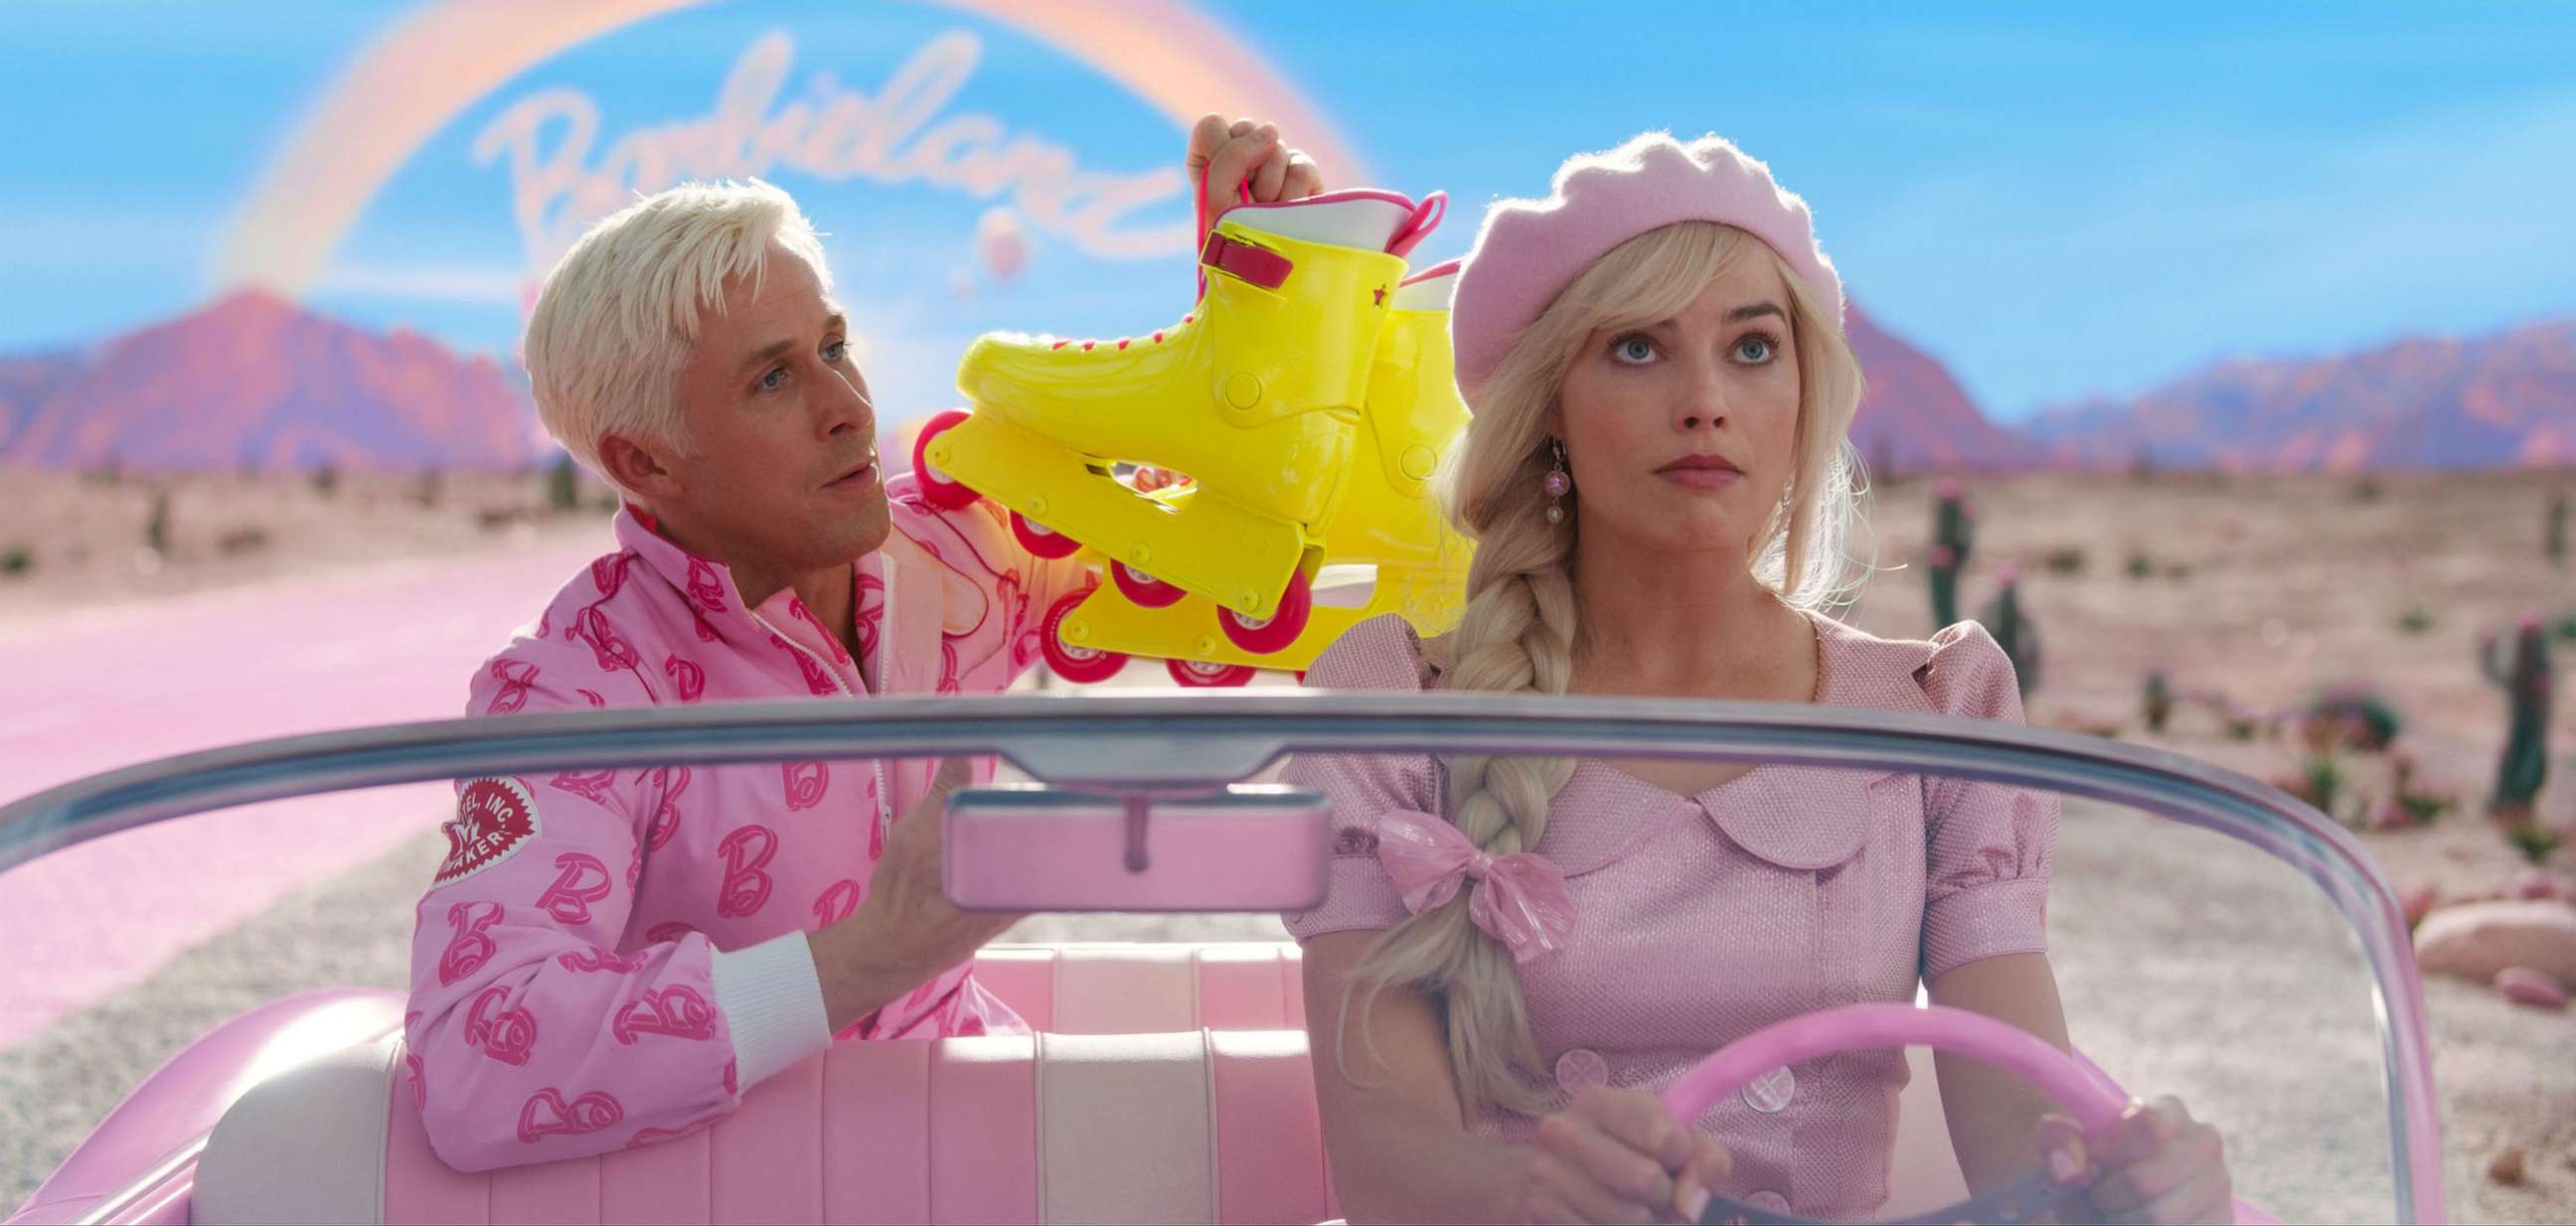 PHOTO: Ryan Gosling as Ken and Margot Robbie as Barbie as shown in a scene from Warner Bros. Pictures' "Barbie."